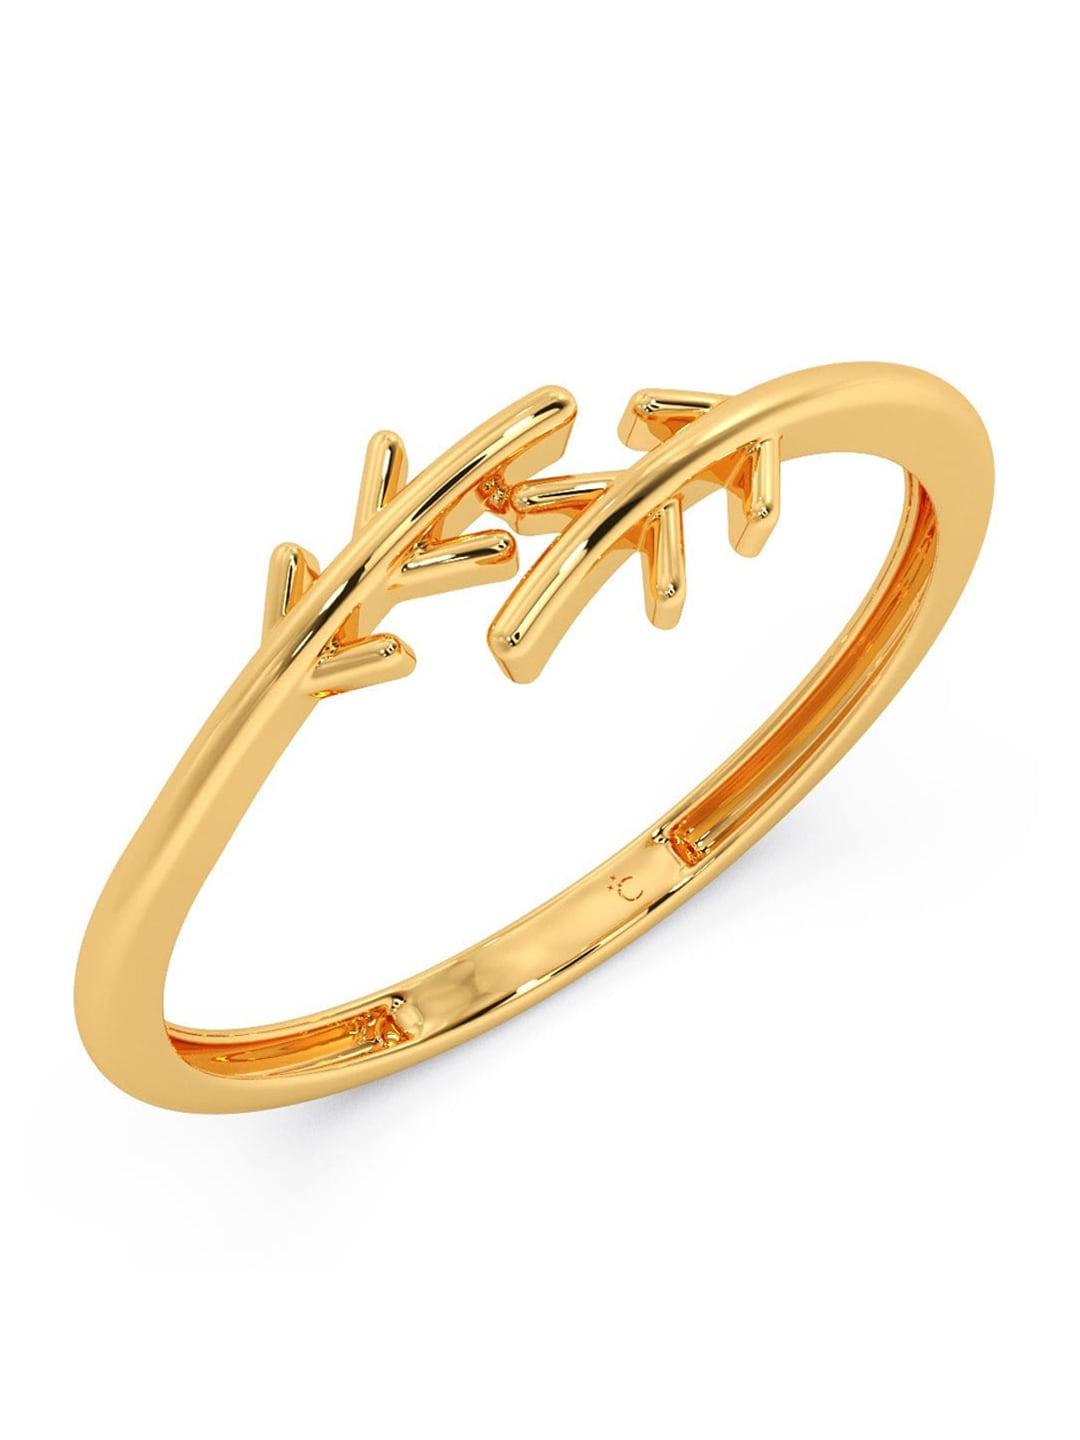 CANDERE A KALYAN JEWELLERS COMPANY 18KT Gold Ring-0.66gm